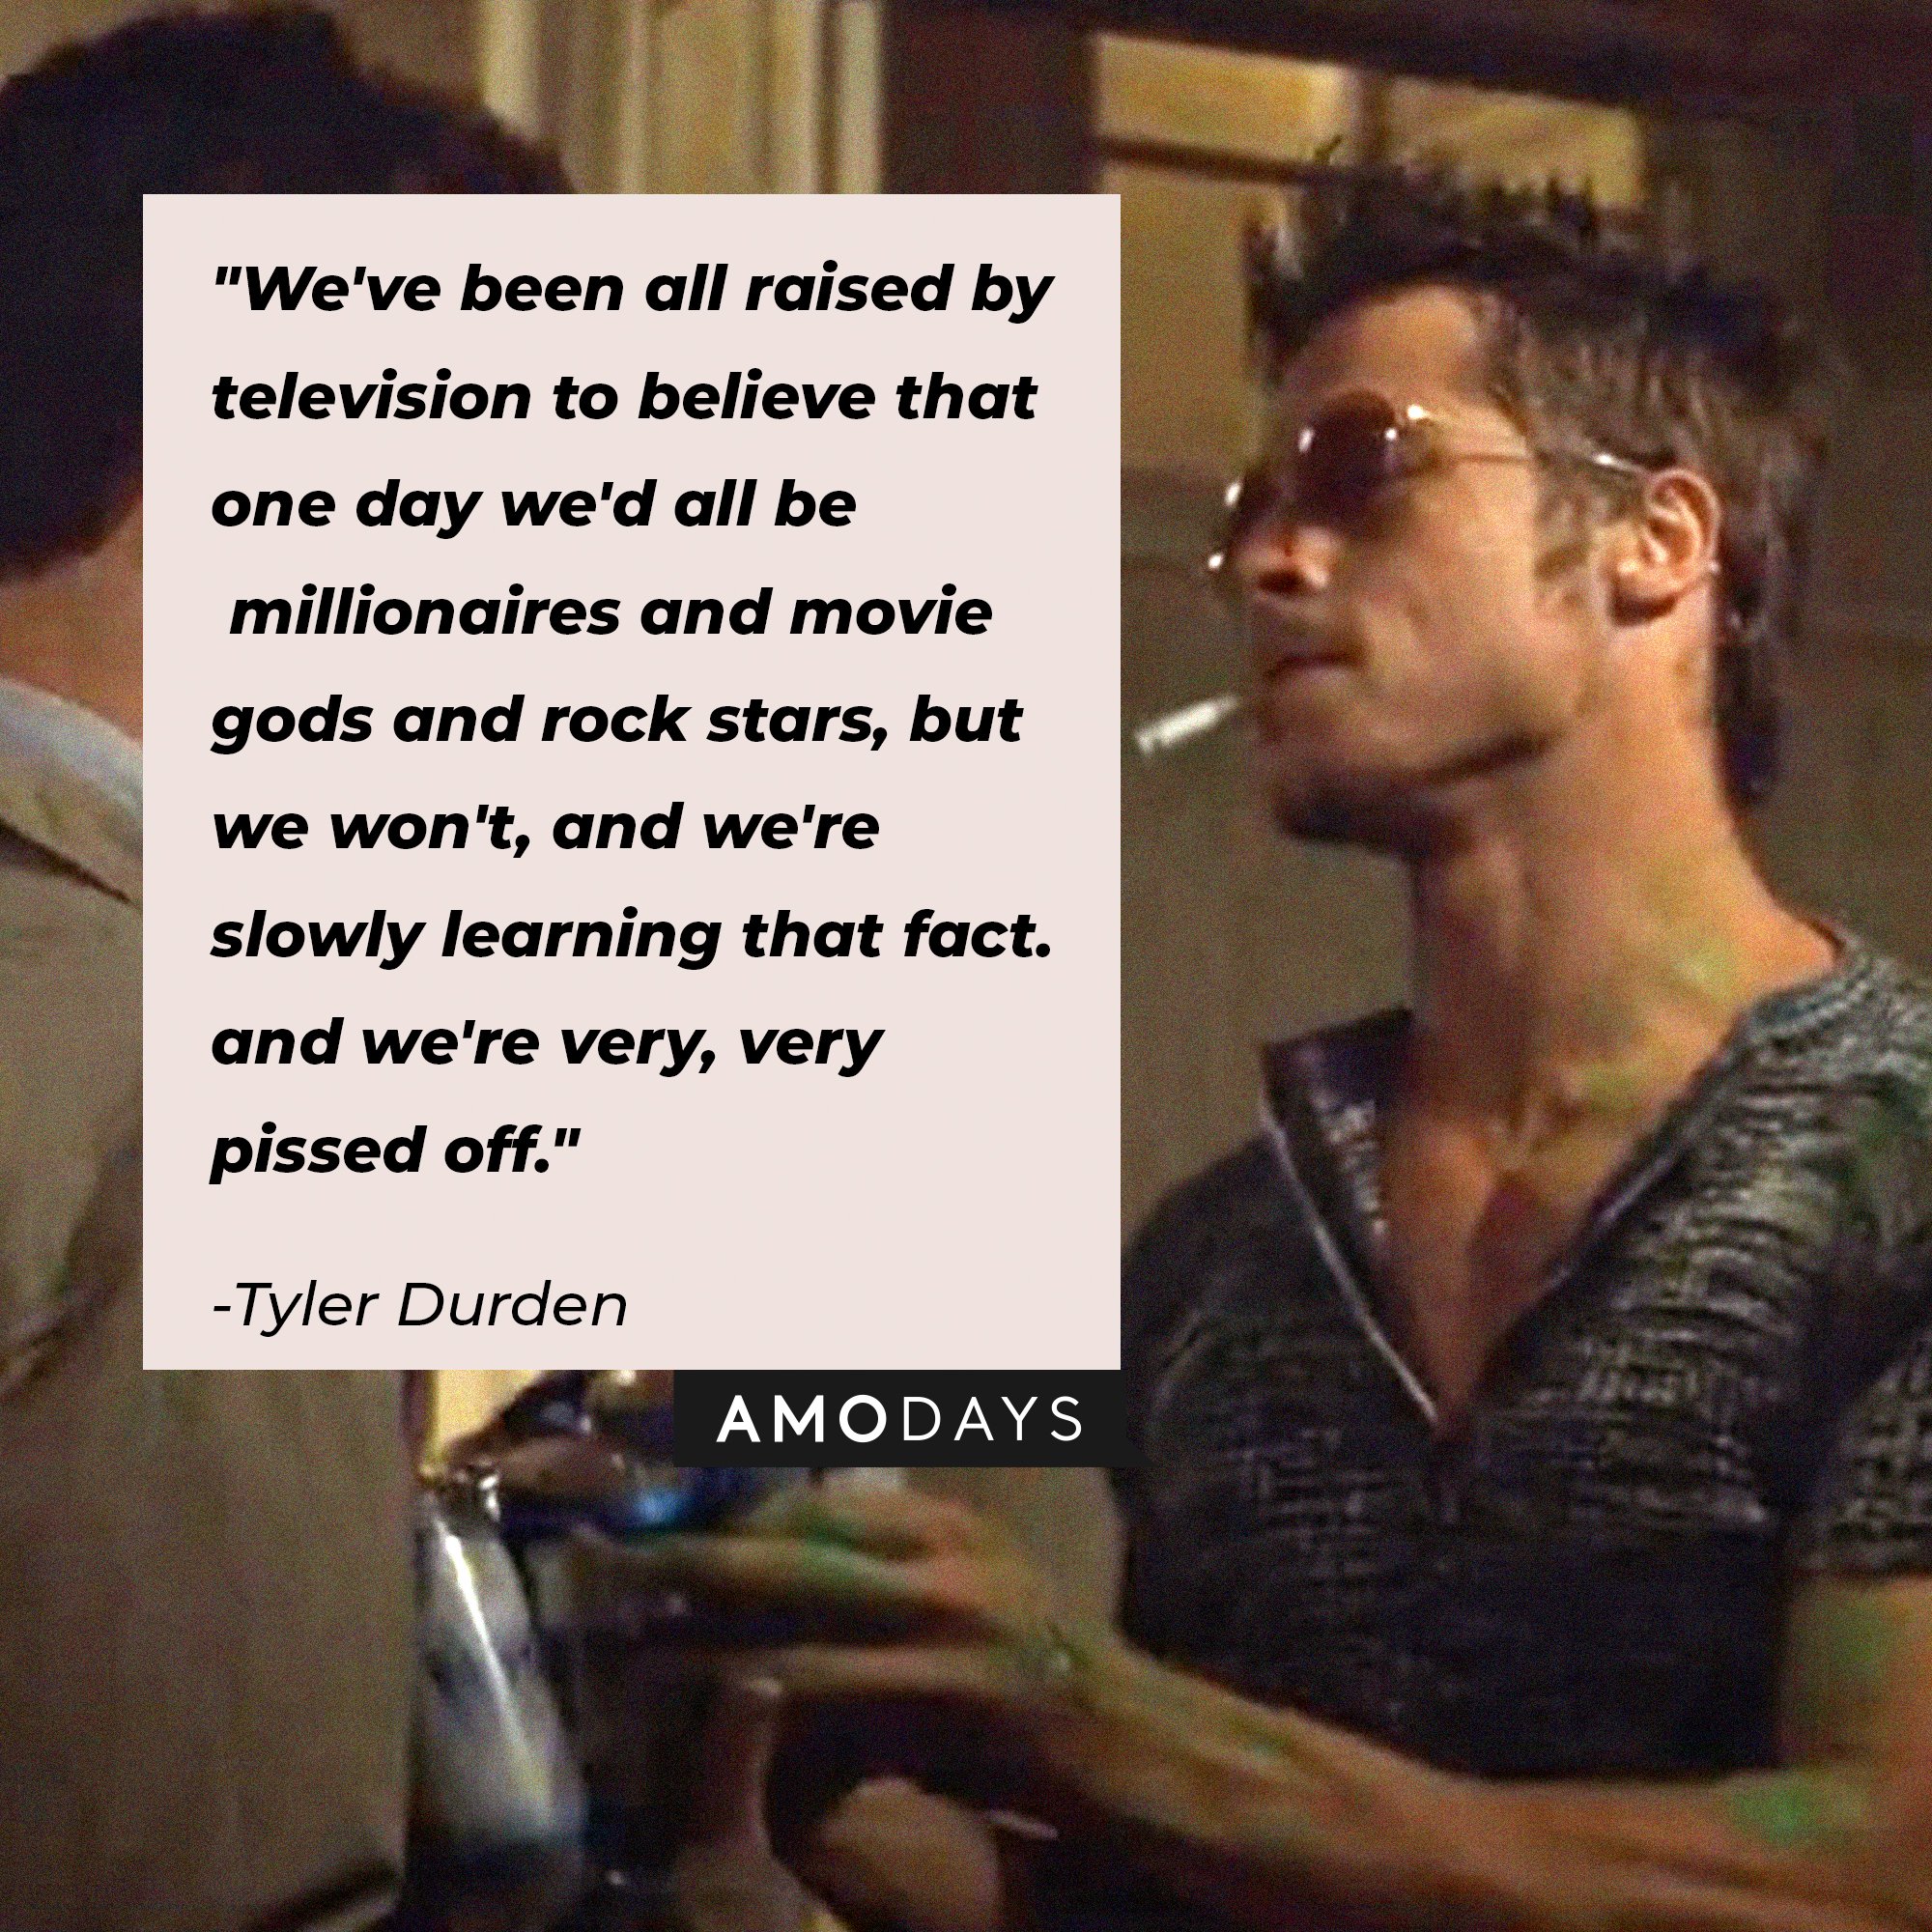 Tyler Durden’s quote: "We've been all raised by television to believe that one day we'd all be millionaires and movie gods and rock stars, but we won't, and we're slowly learning that fact. and we're very, very pissed off." | Image: AmoDays